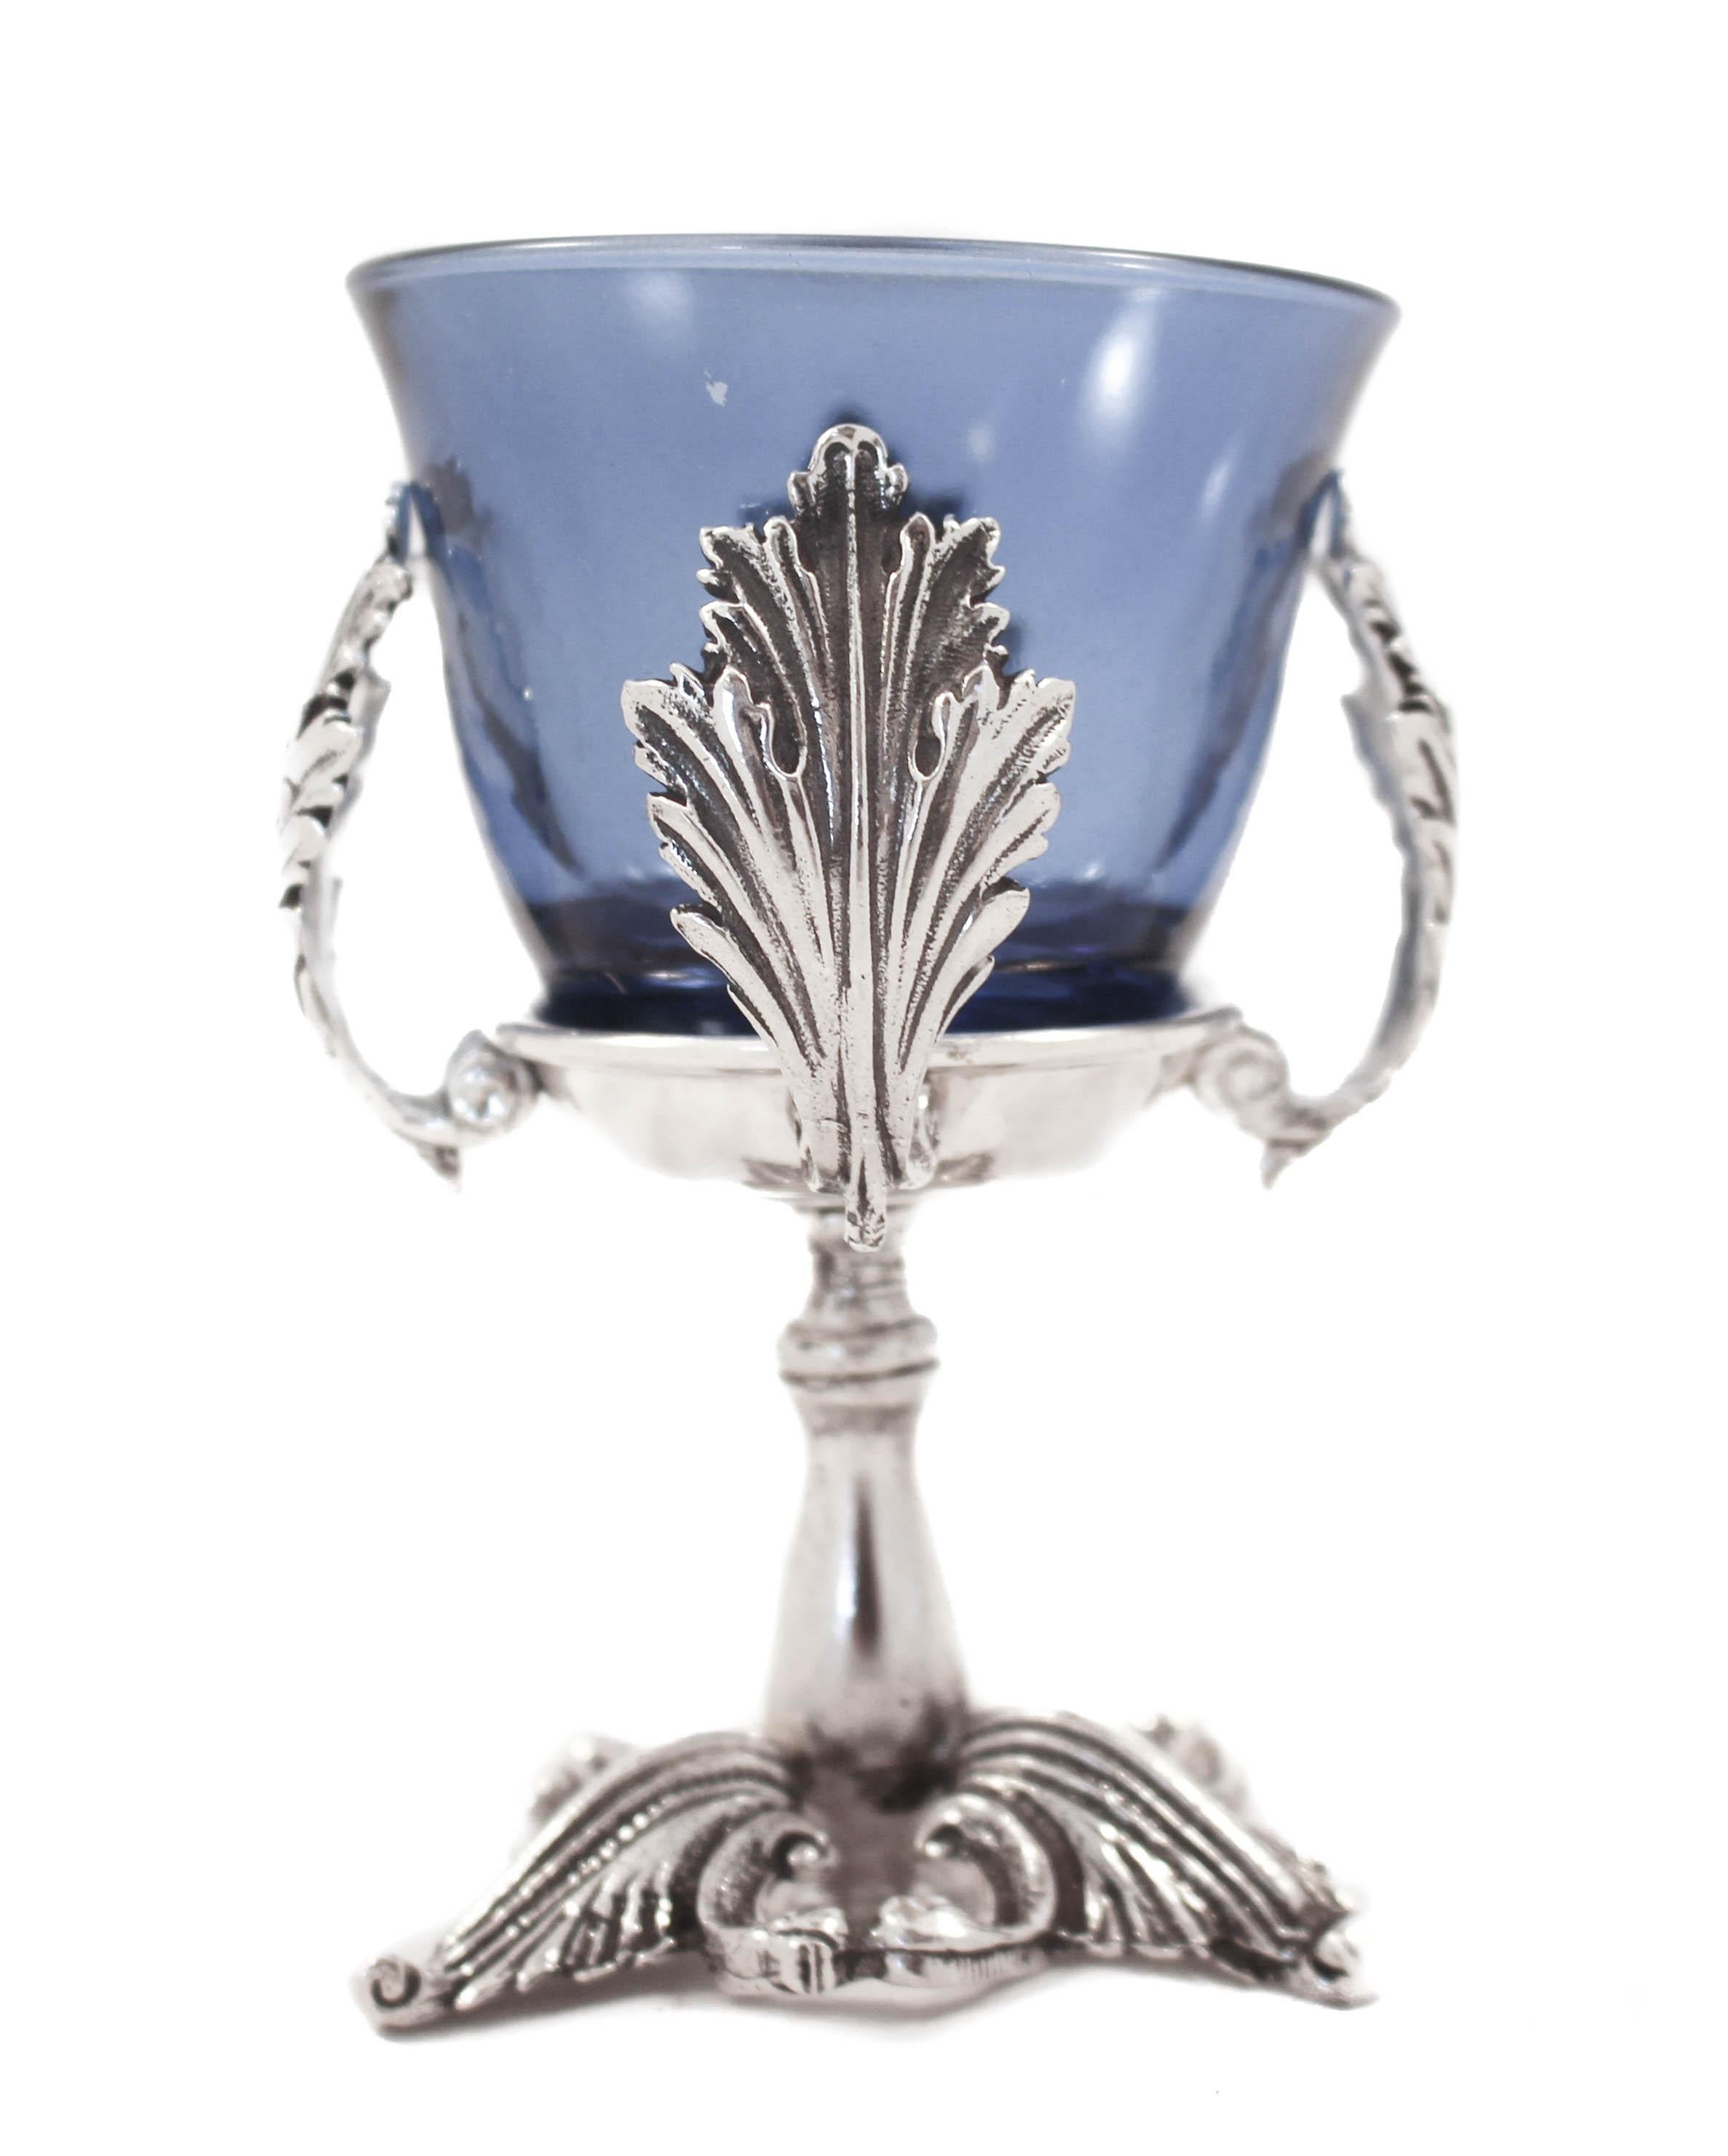 We are happy to offer you this sterling silver salt cellar. It has a blue glass liner and a sterling salt spoon. Propped on a Rococo style stand the glass is hugged by four leaves. It’s super easy to remove, wash and return after using. The spoon is